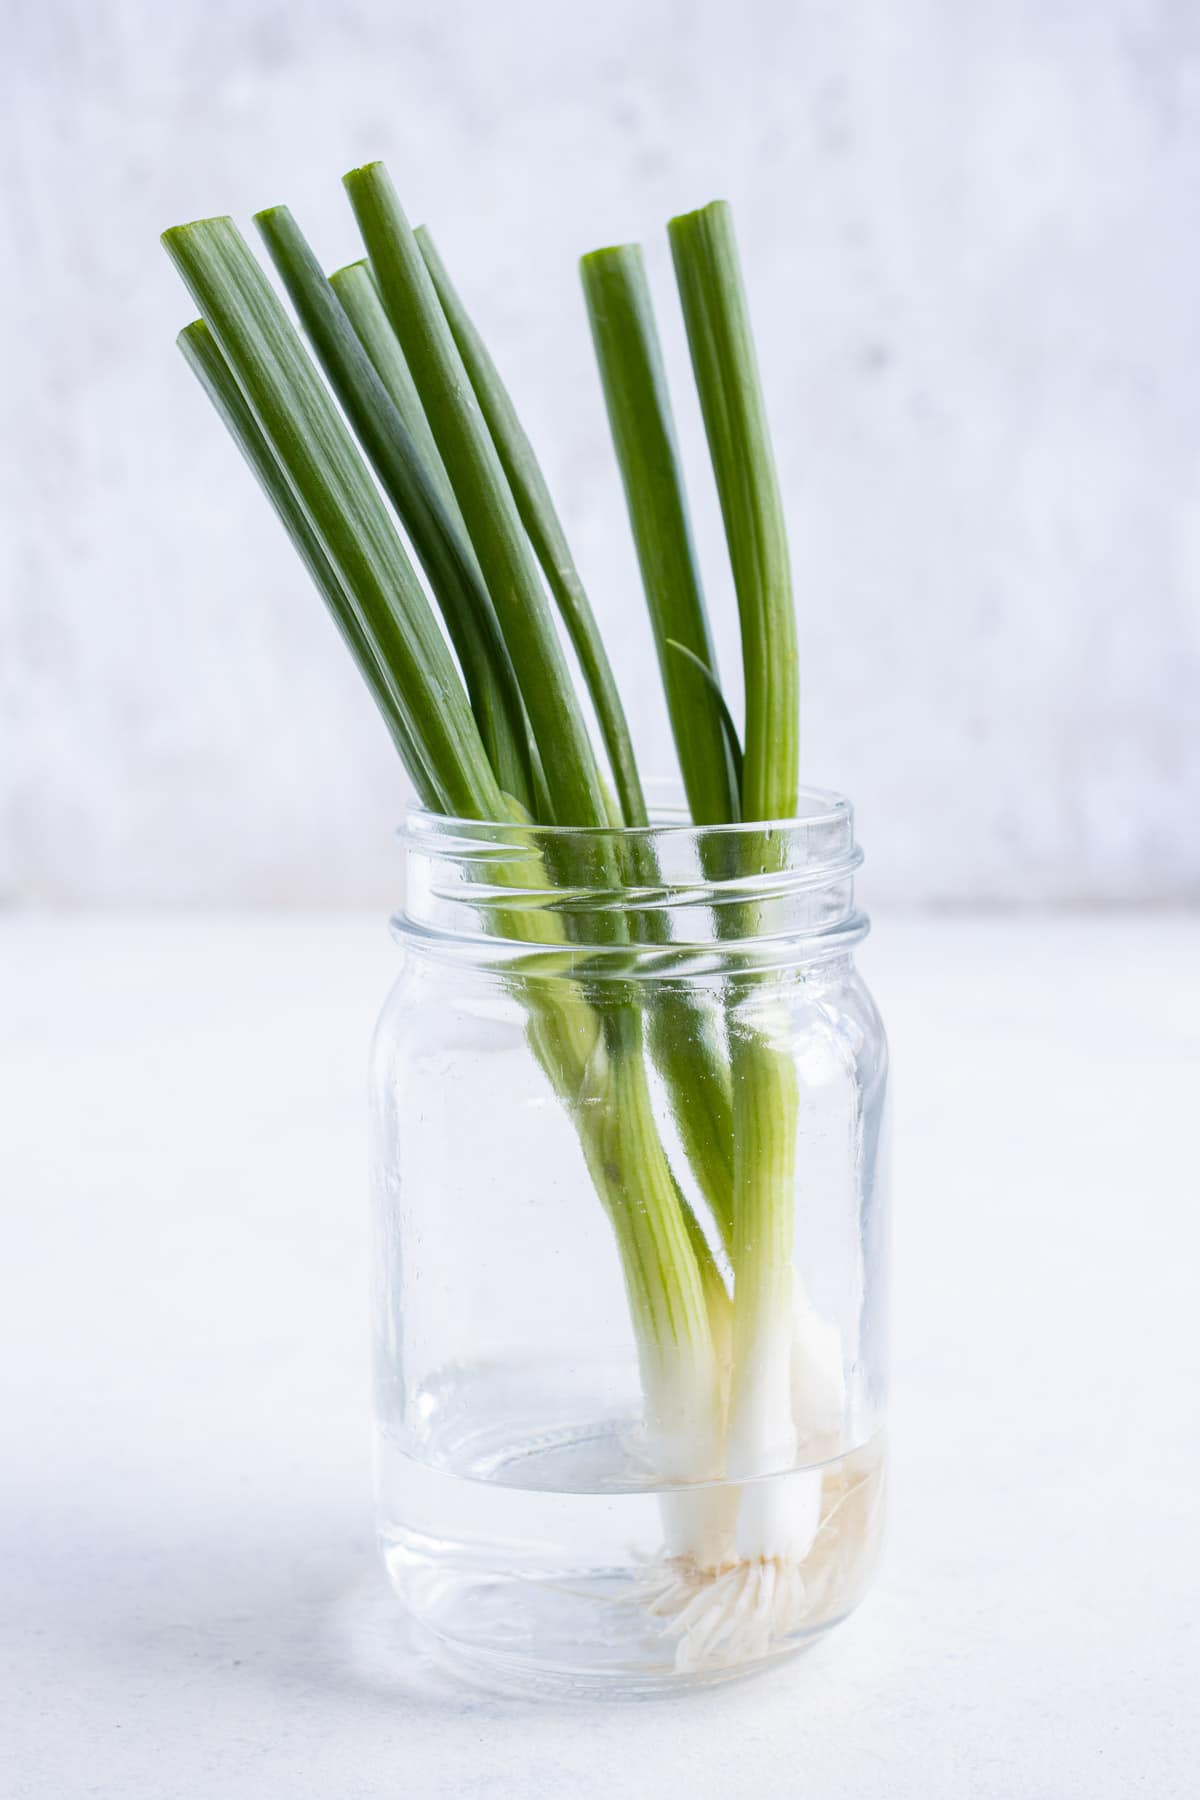 The fresh green onions are placed in a jar.